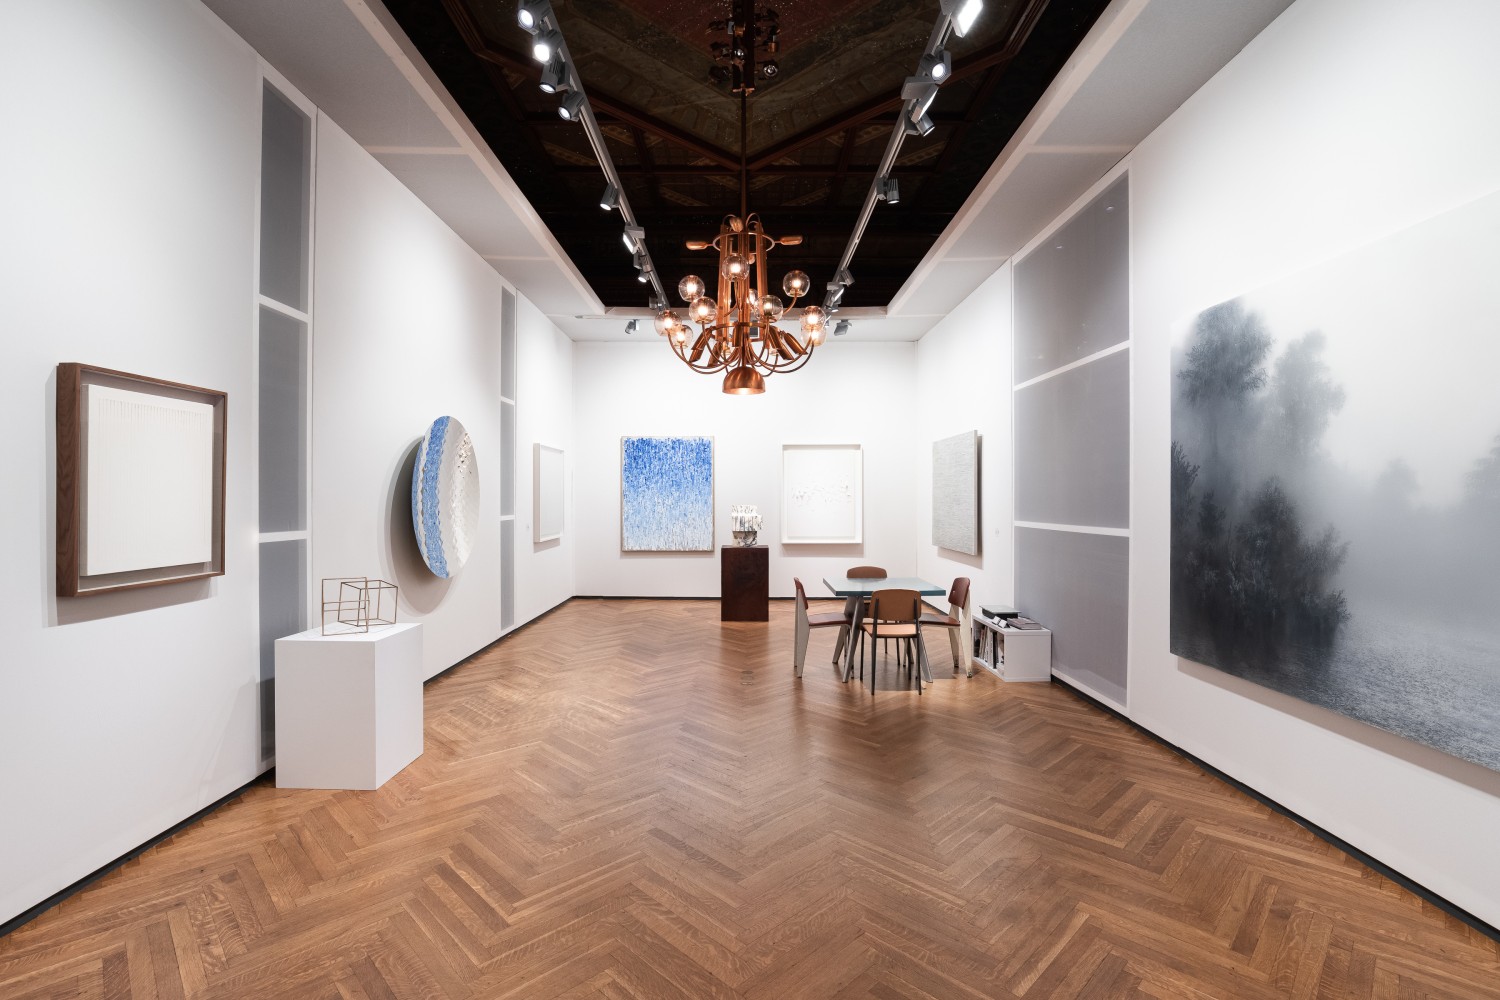 Installation view of TEFAF New York 2022 (BOOTH 210). Image courtesy of Tina Kim Gallery. Photo © Charles Roussel / Ocula